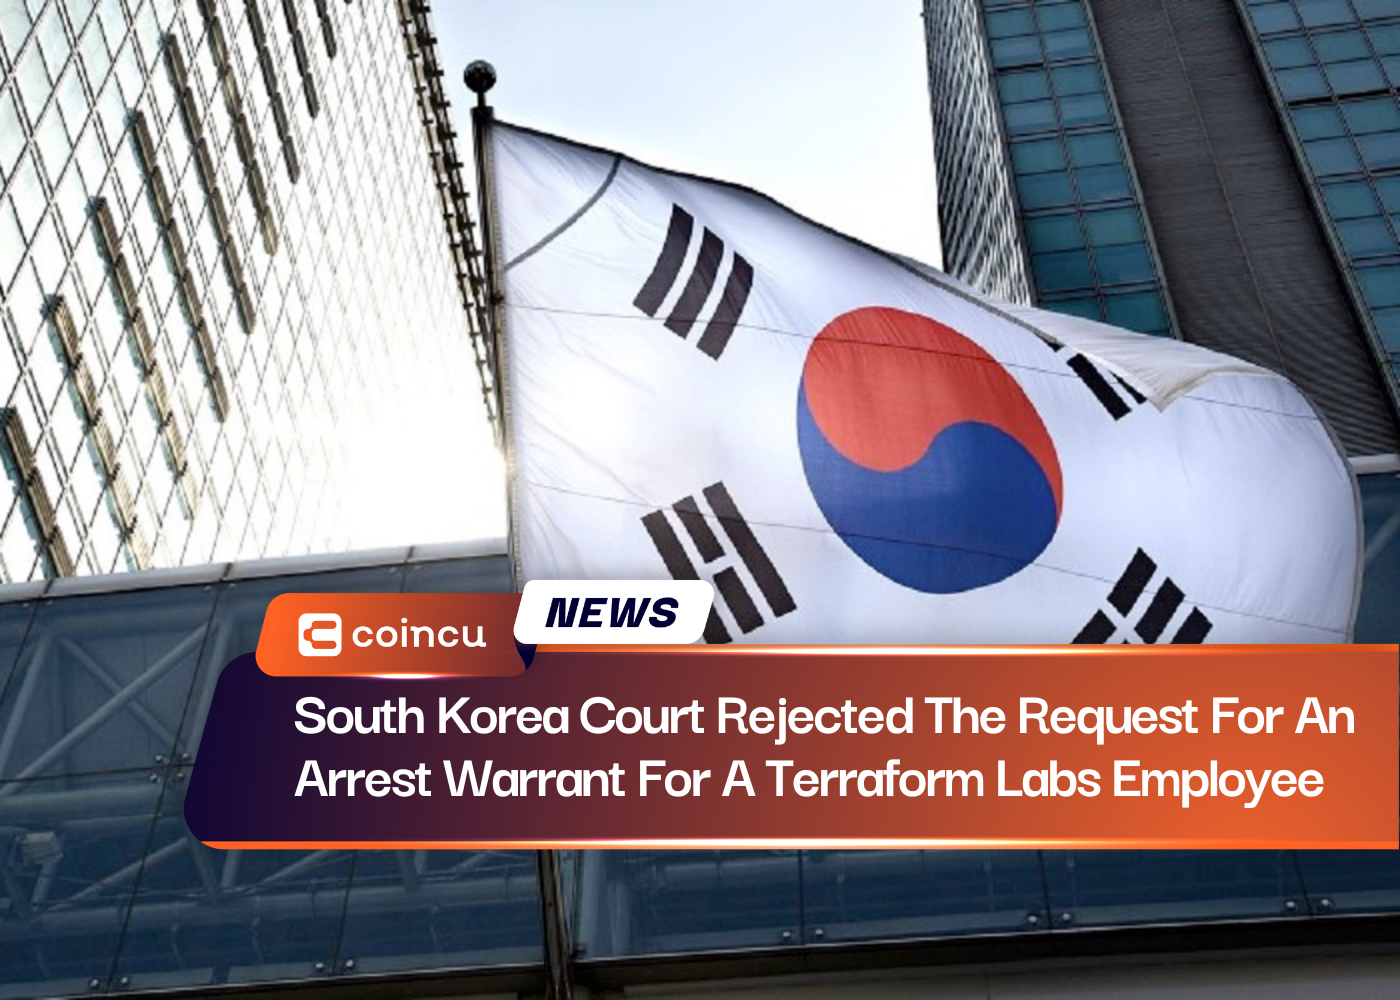 South Korea Court Rejected The Request For An Arrest Warrant For A Terraform Labs Employee